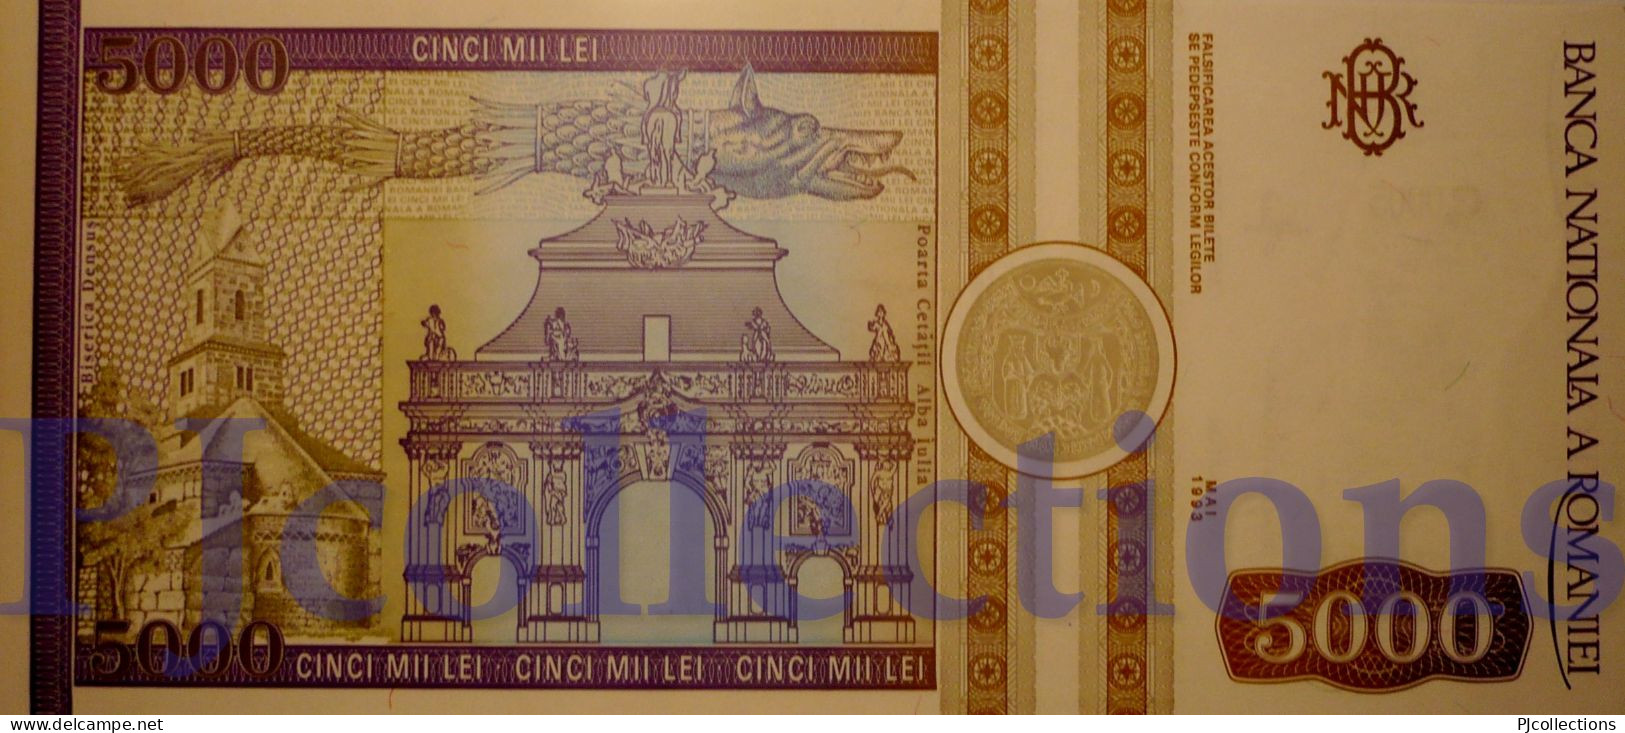 ROMANIA 5000 LEI 1993 PICK 104a UNC LOW & GOOD SERIAL NUMBER "000900" - Romania